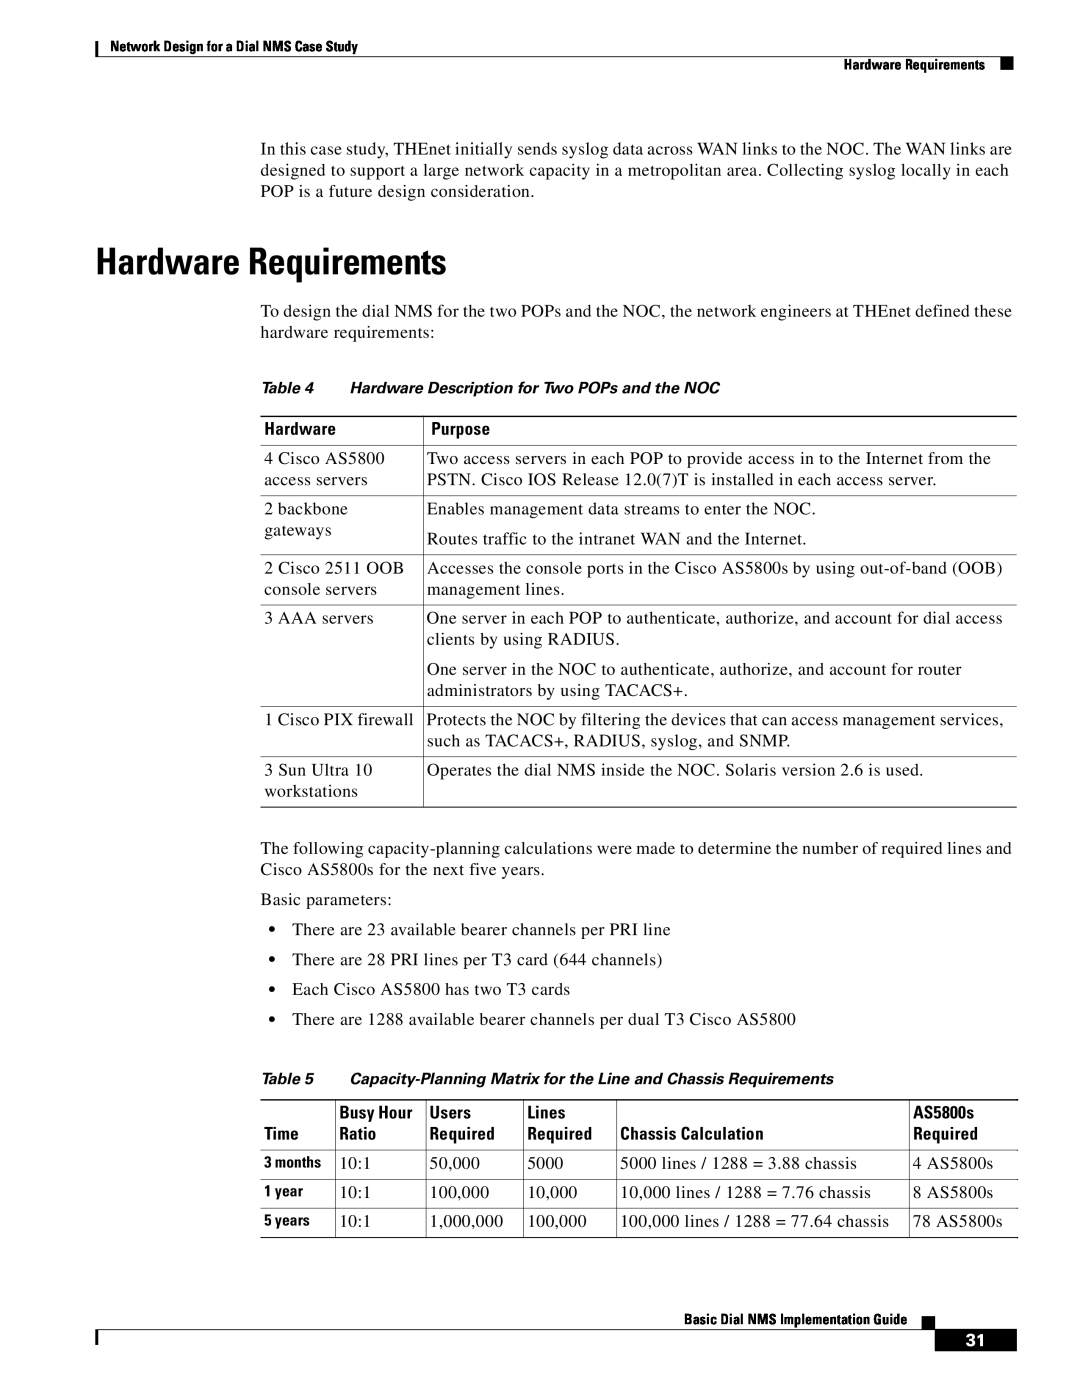 Cisco Systems Dial NMS manual Hardware Requirements, Hardware Description for Two POPs and the NOC, months, years 